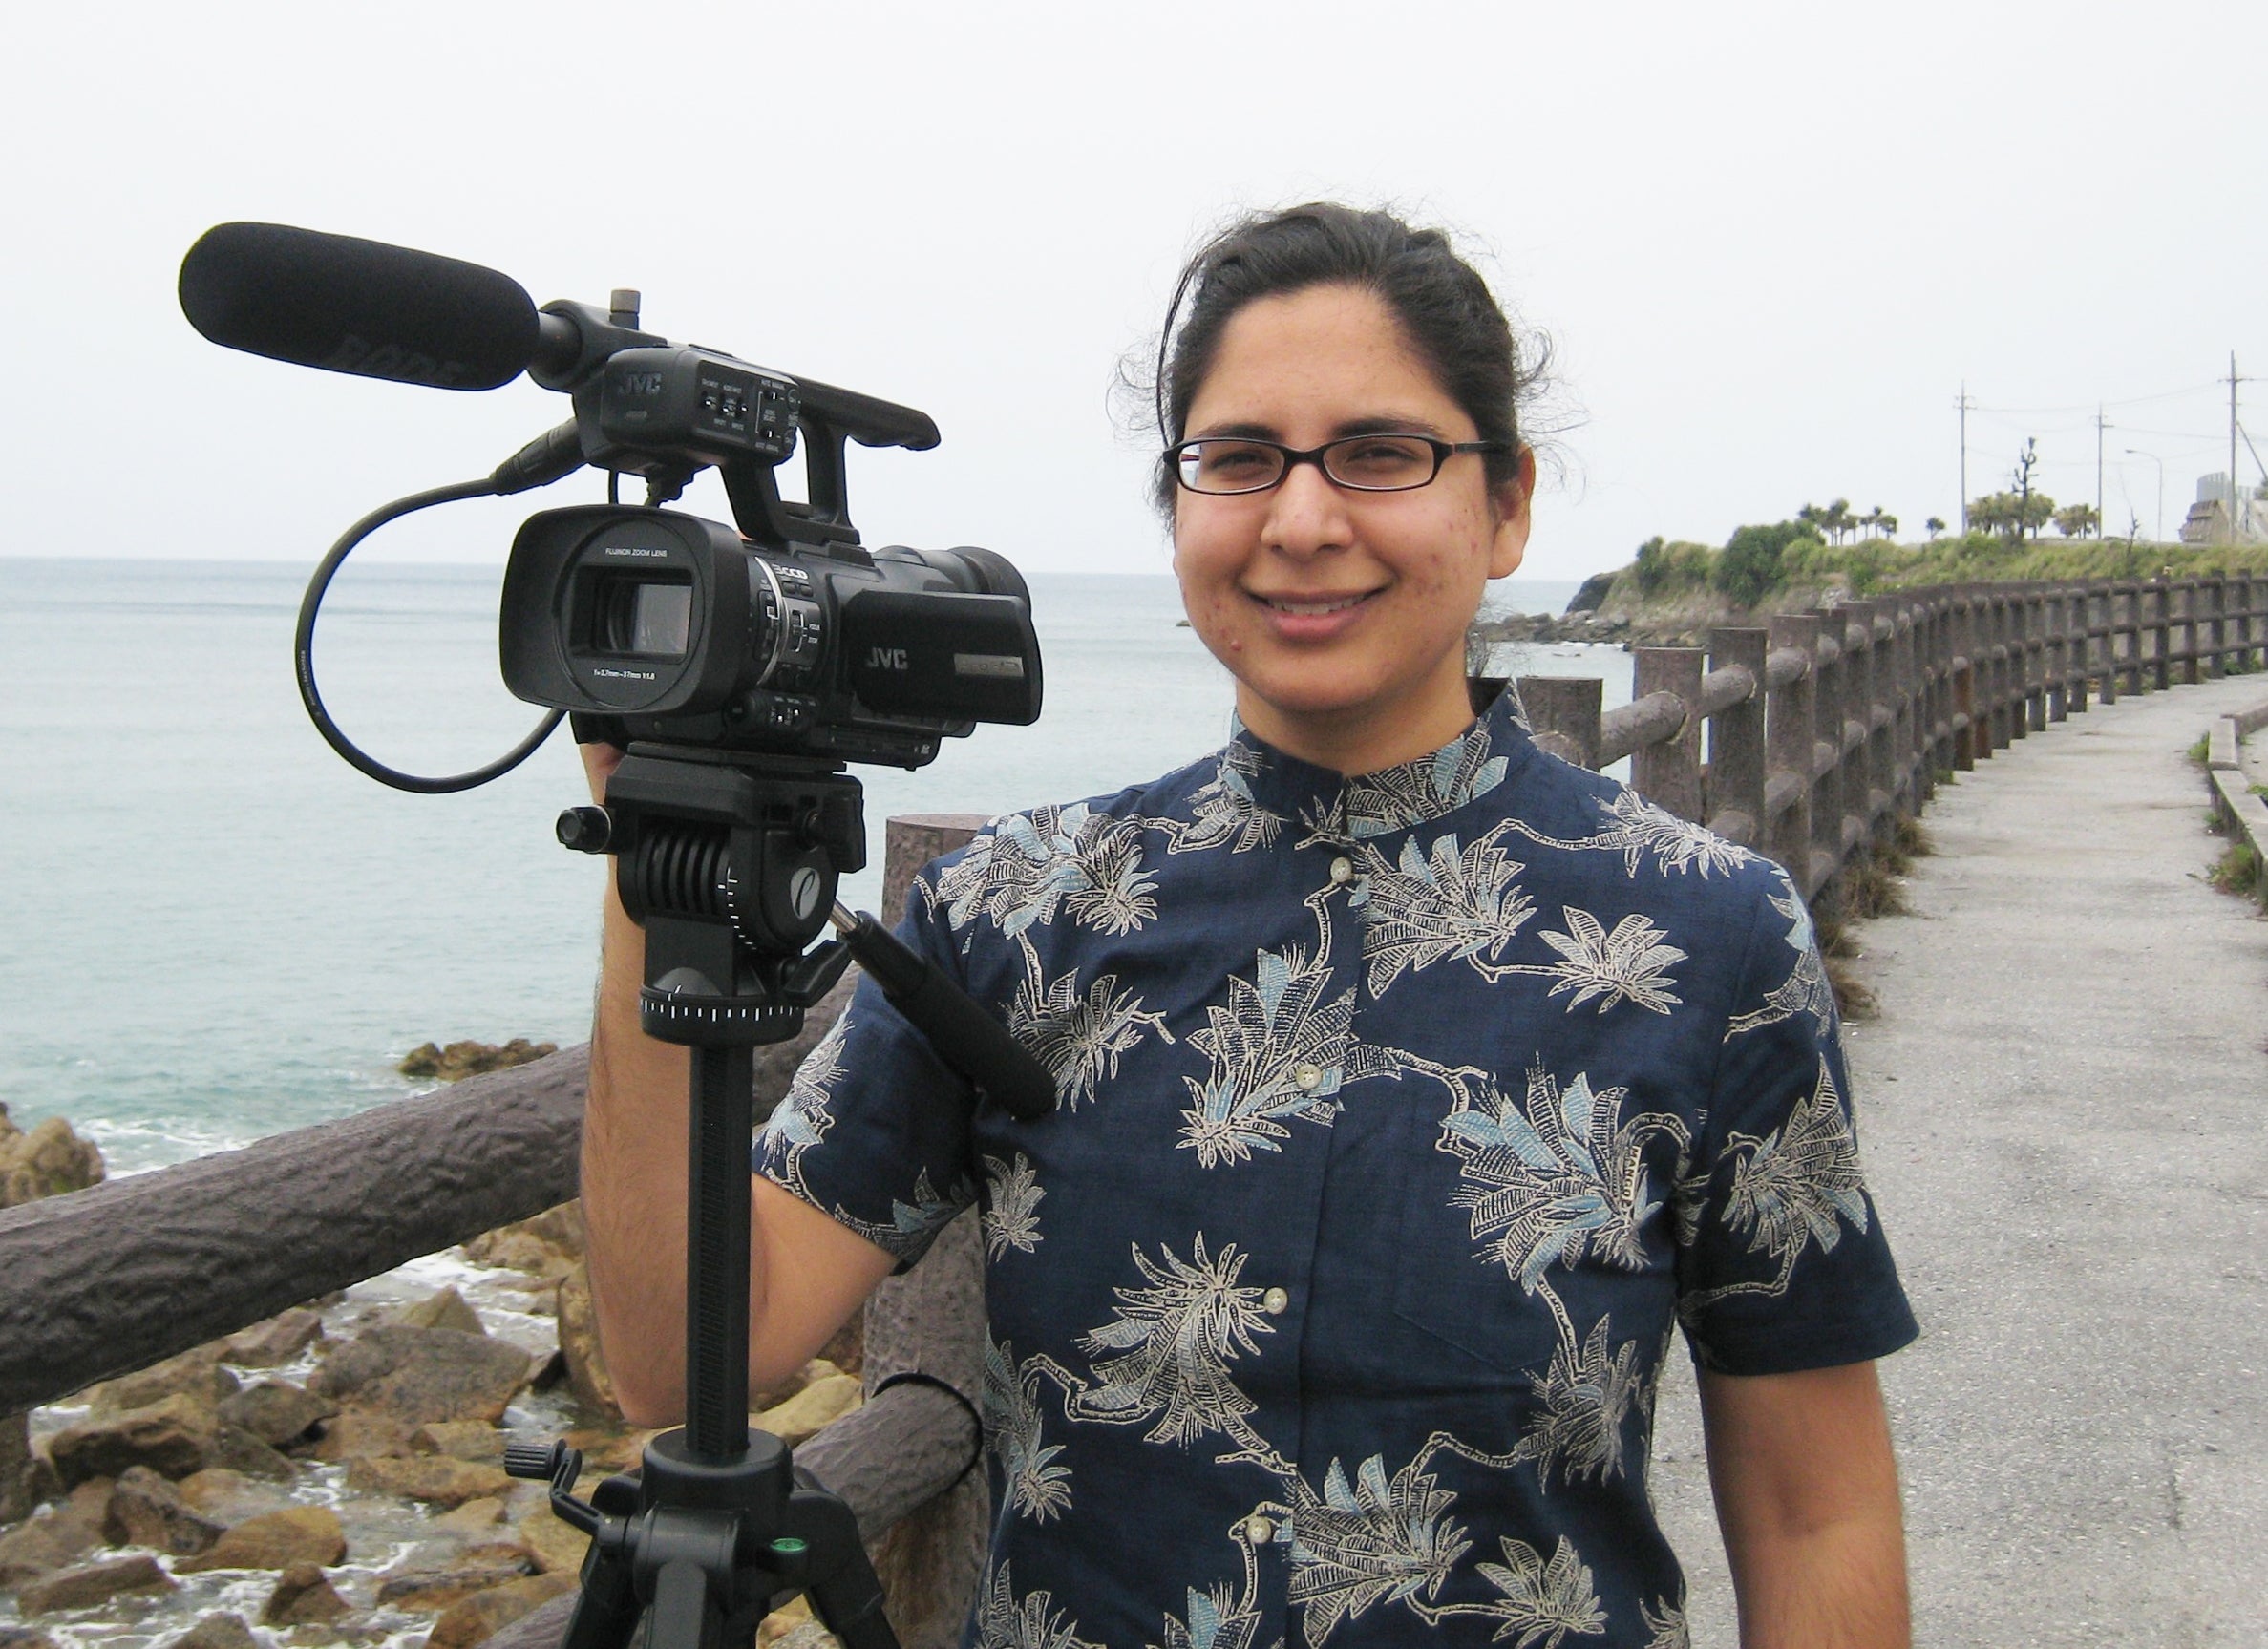 Photo of woman with black hair and glasses standing behind a video camera. There is a fence and coastal water in the background.